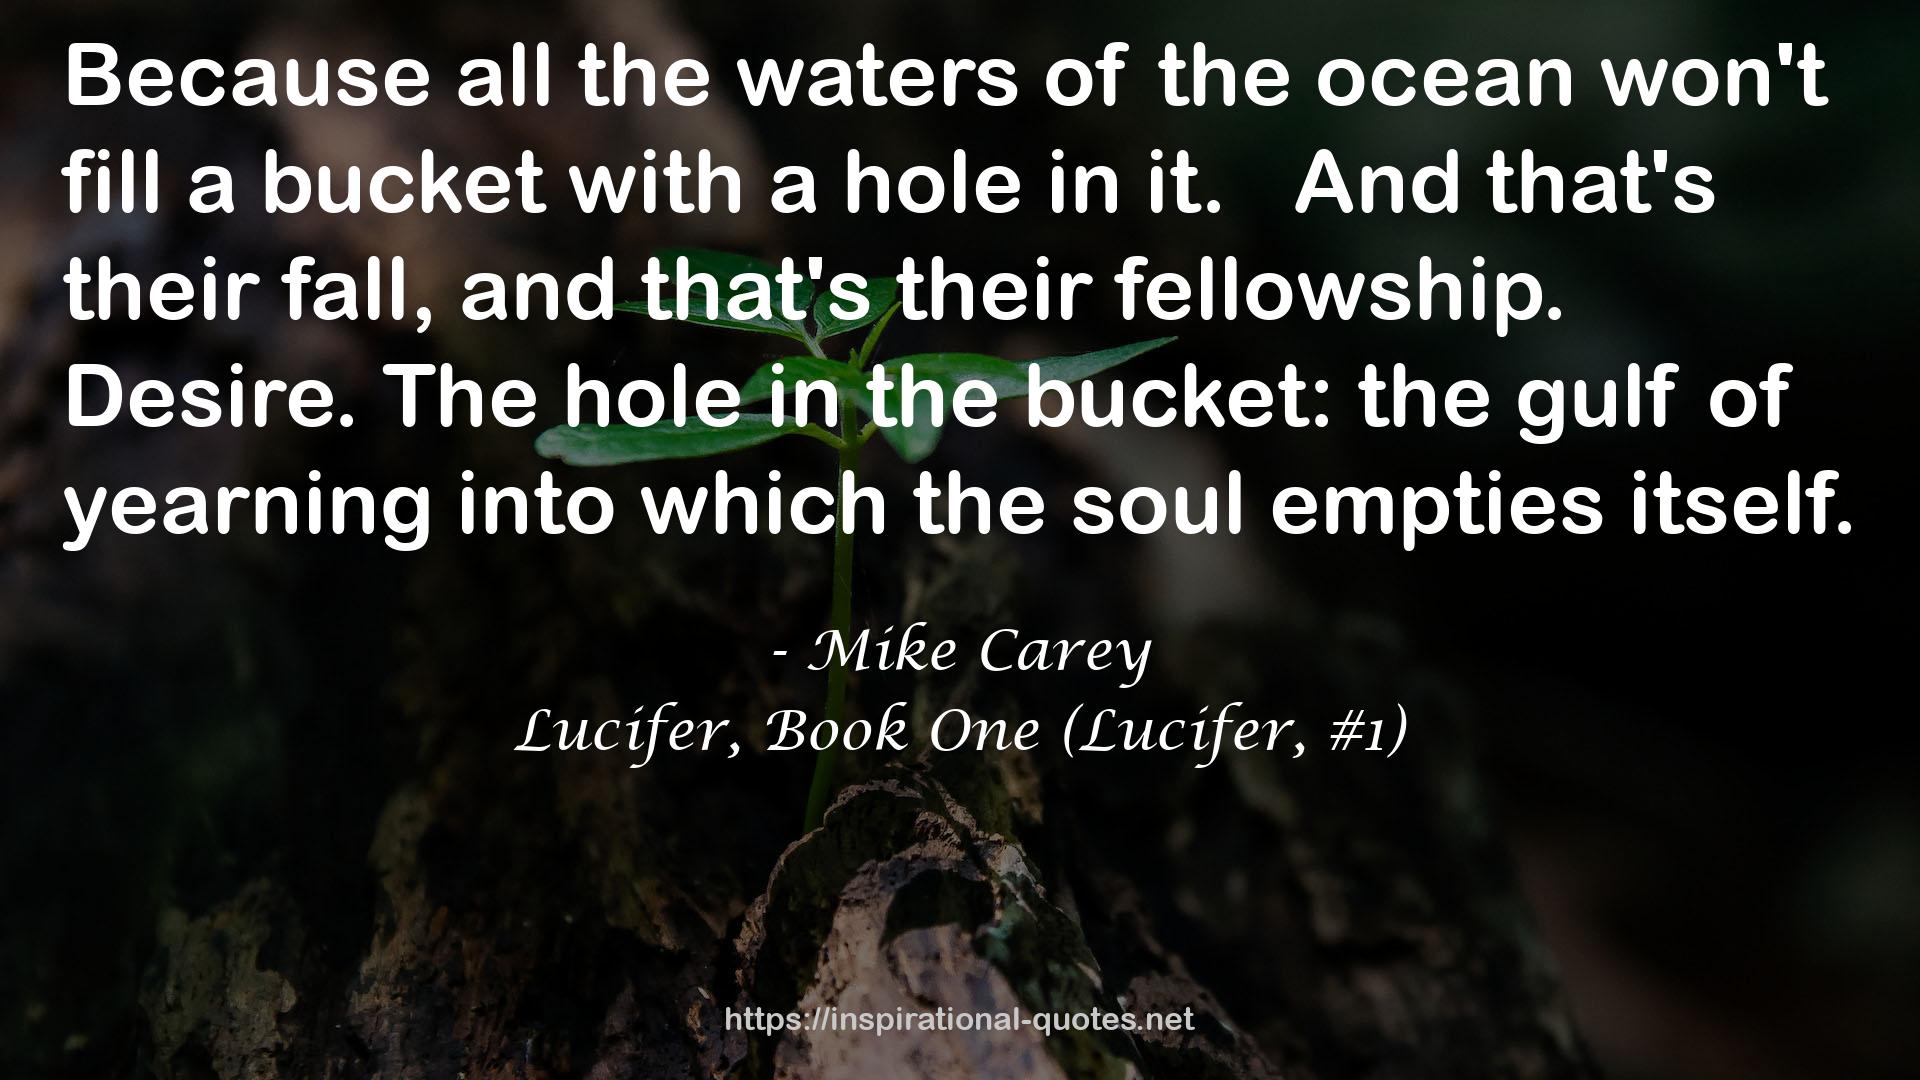 Lucifer, Book One (Lucifer, #1) QUOTES